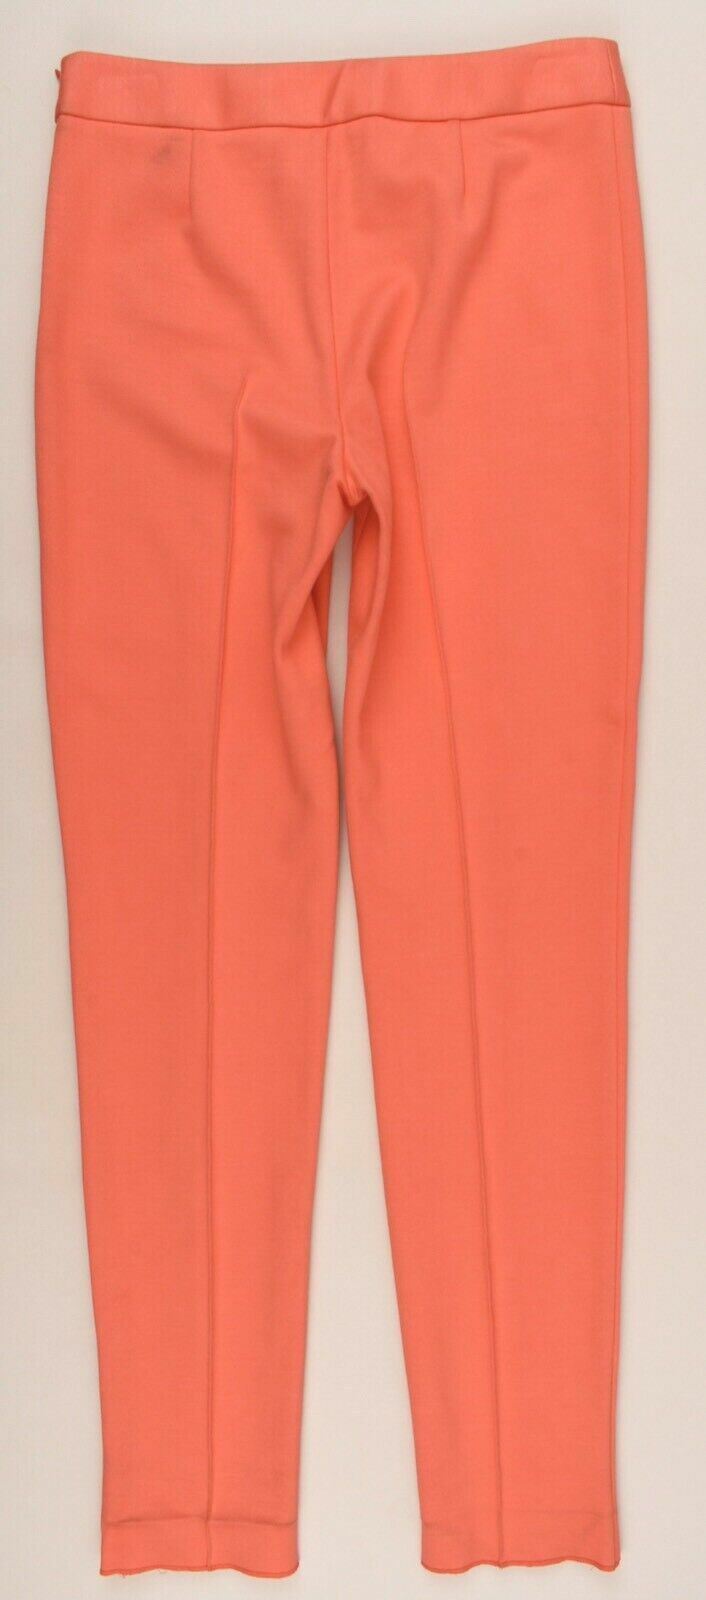 BOUTIQUE MOSCHINO Women's Ponte Skinny Trousers Neon Coral, size UK 8